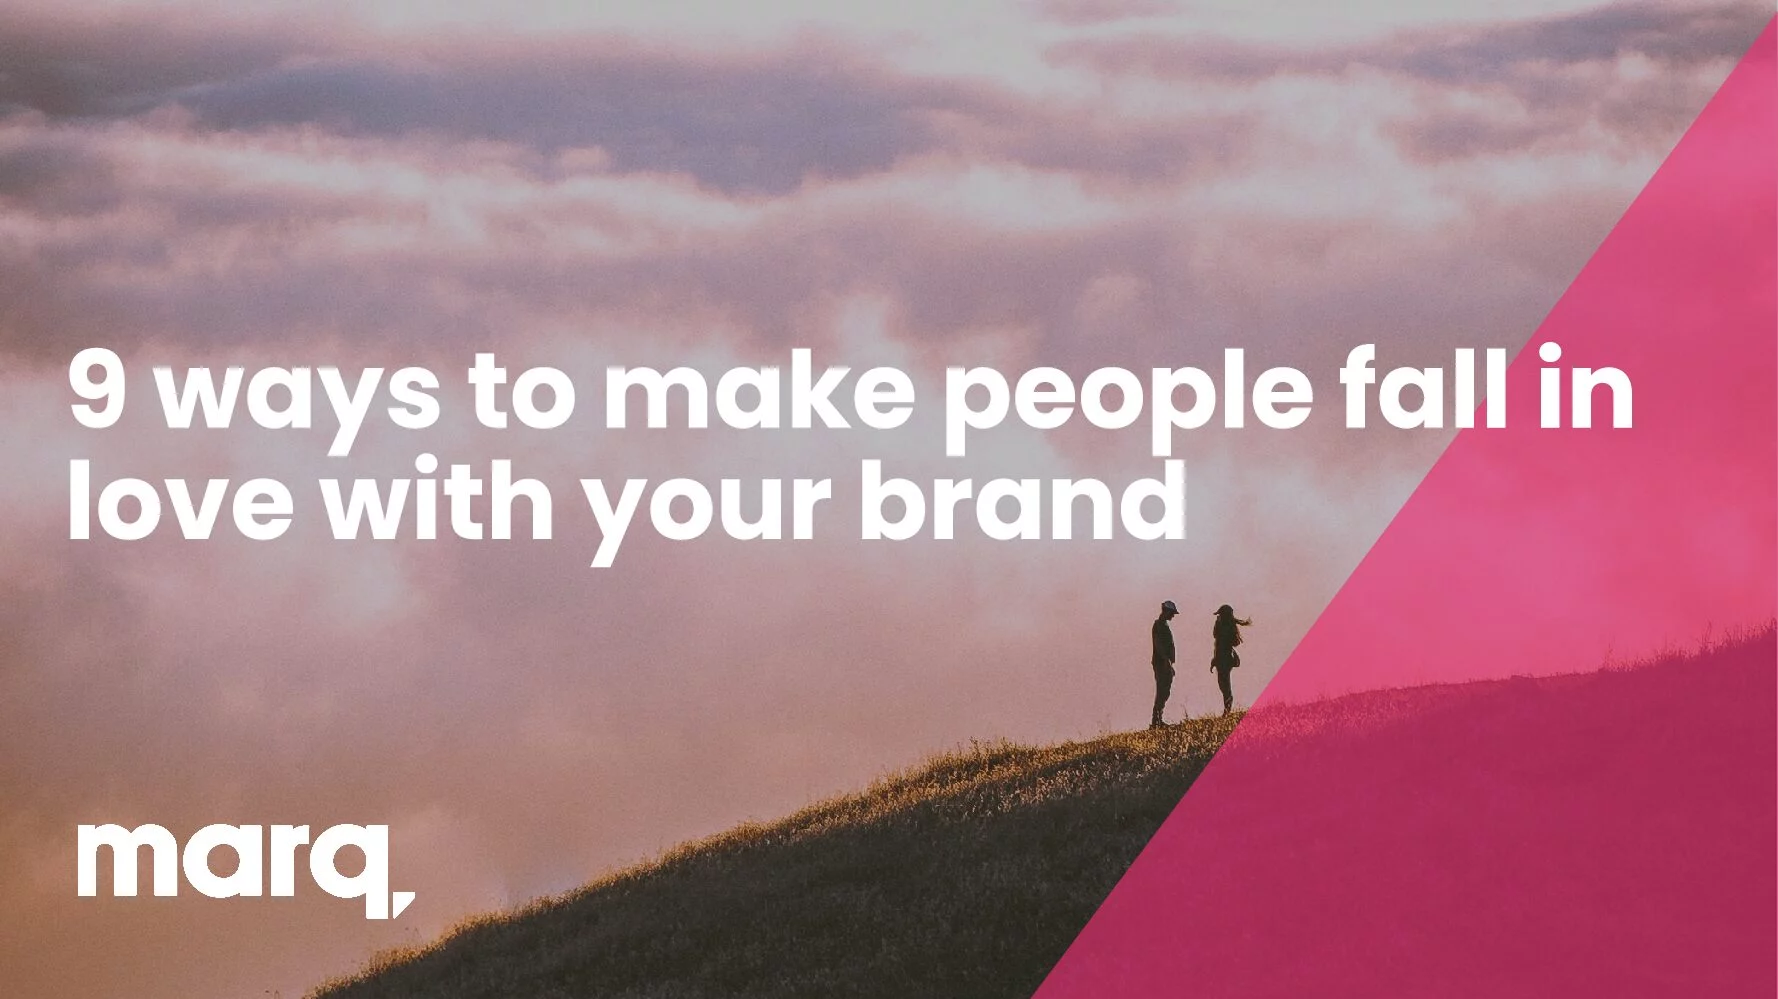 9 ways to make people fall in love with your brand